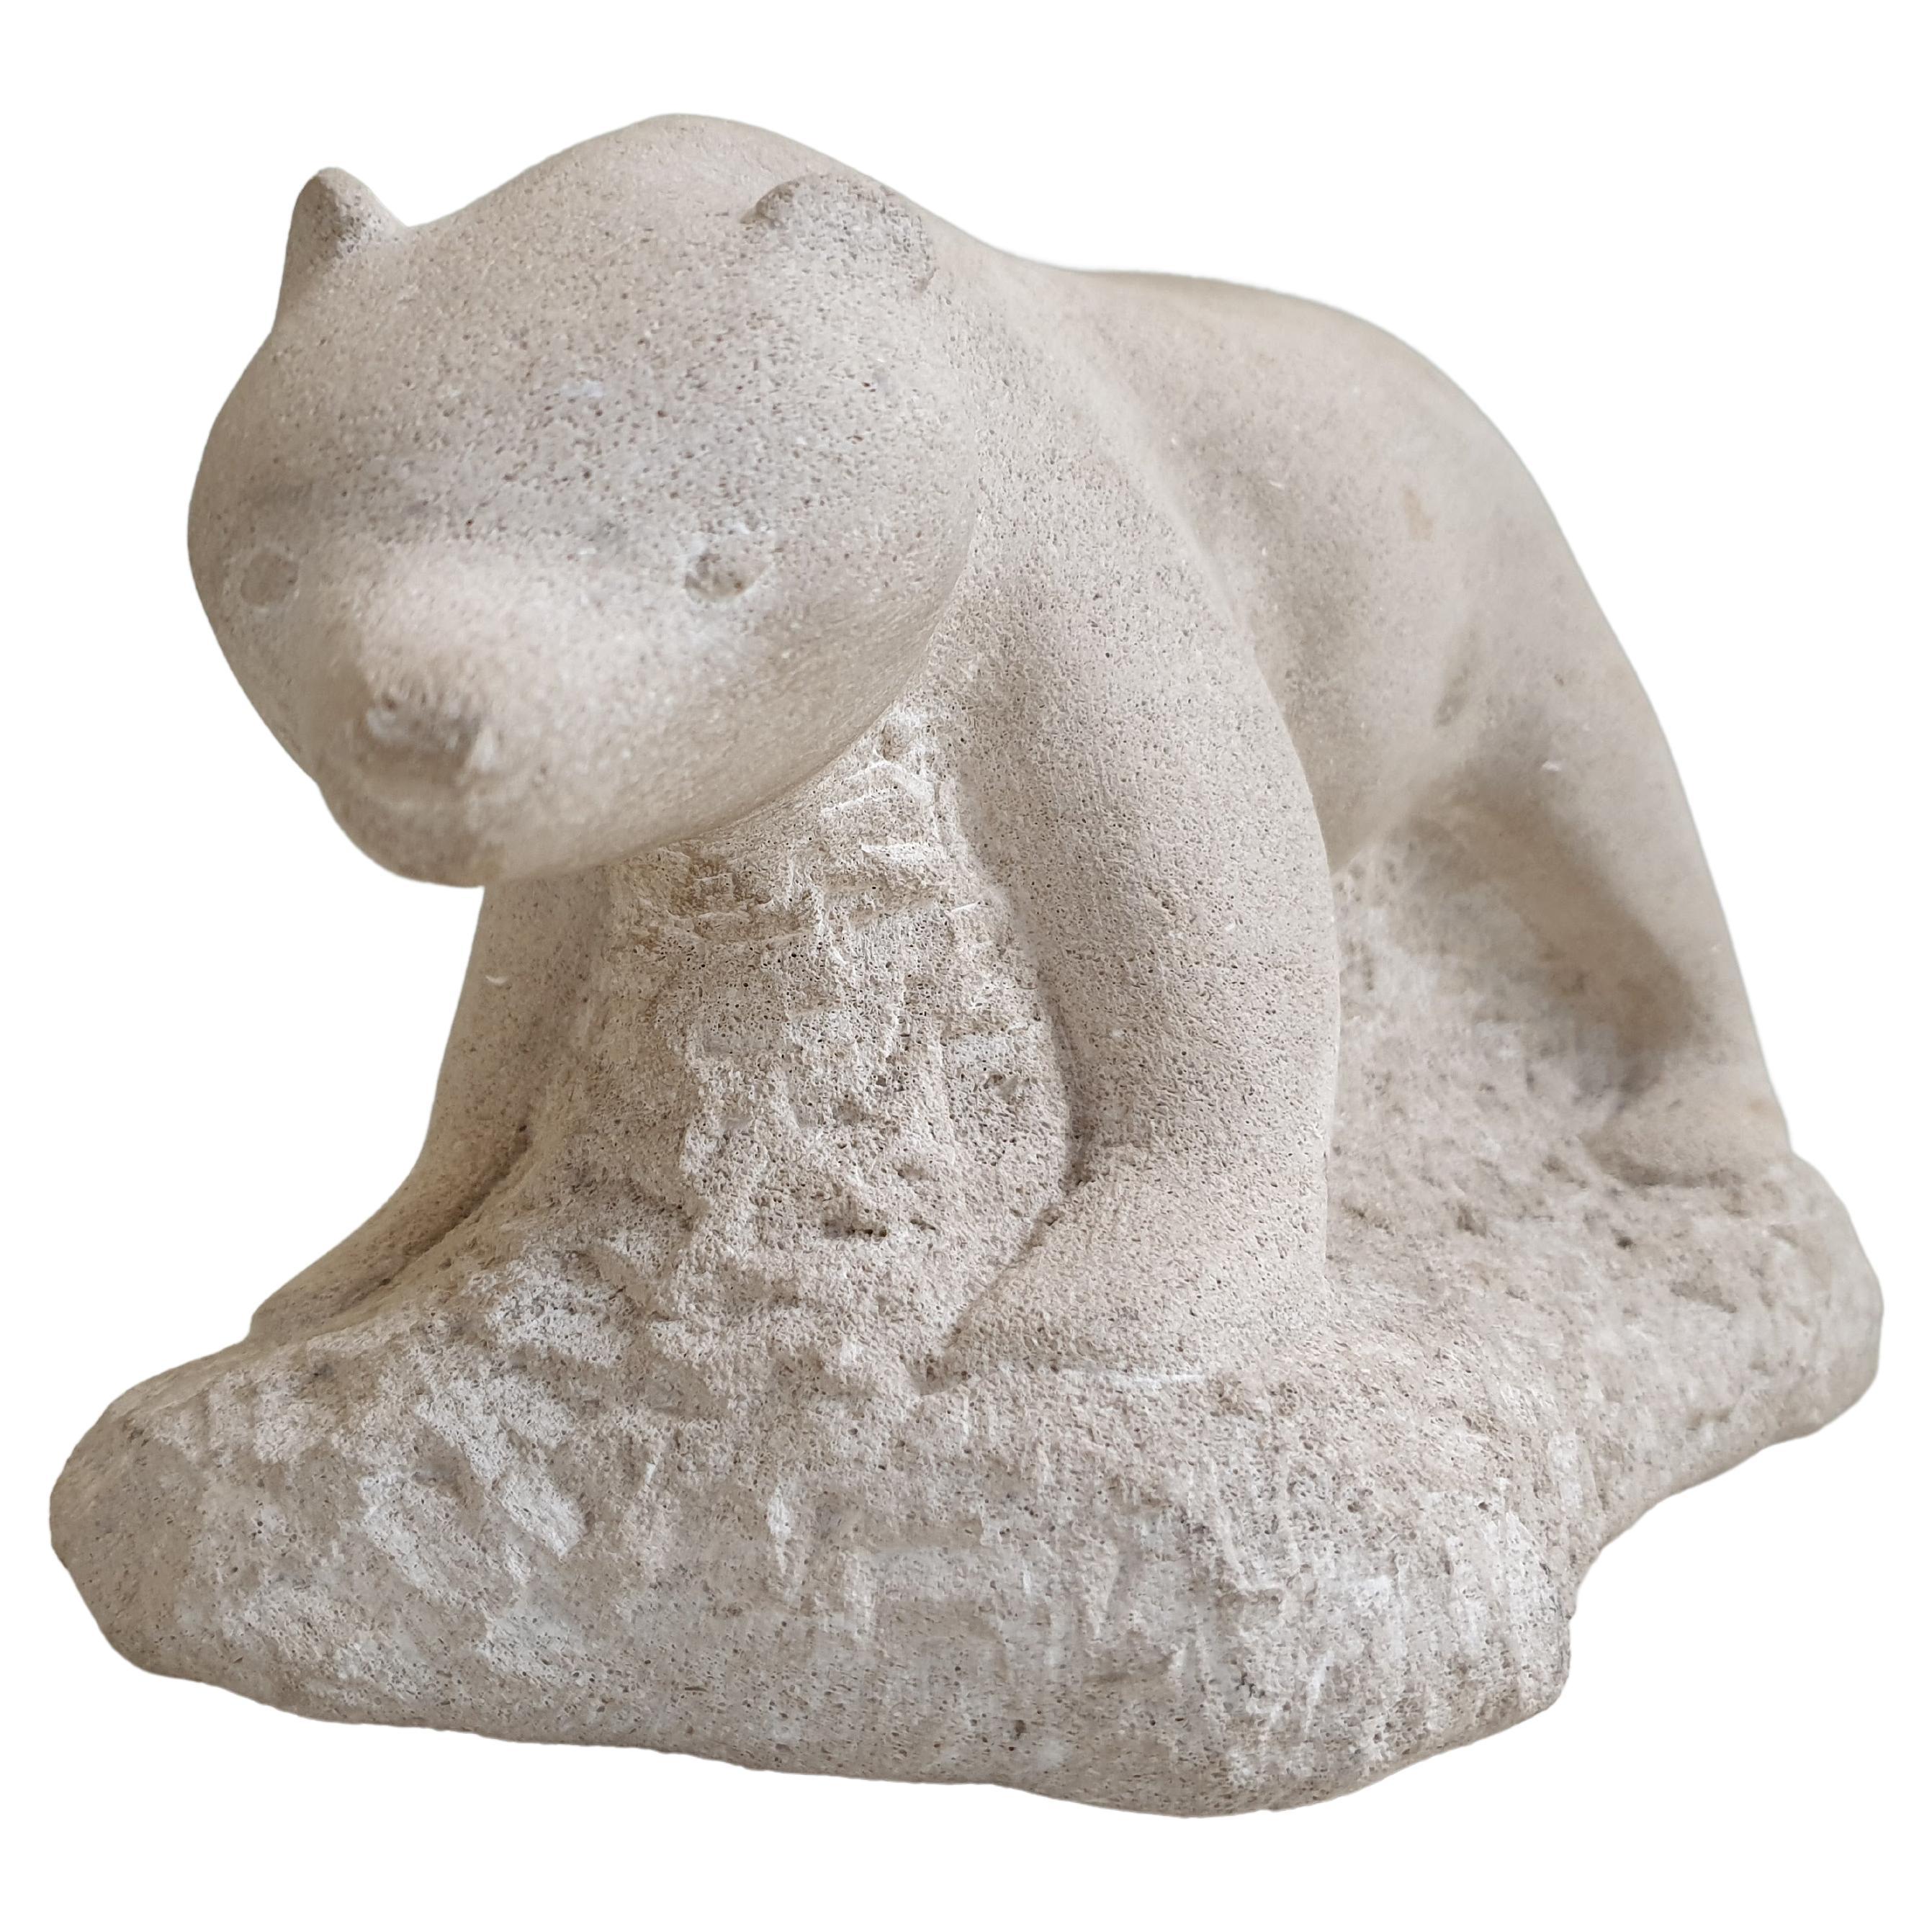 This beautiful polar bear sculpture in stone, has a whimsical quality to it. The bear is carved beautifully and its face has a sweet expression, it is possibly a polar bear cub. It is rare to see an artist, P Klinck, who can successfully represent